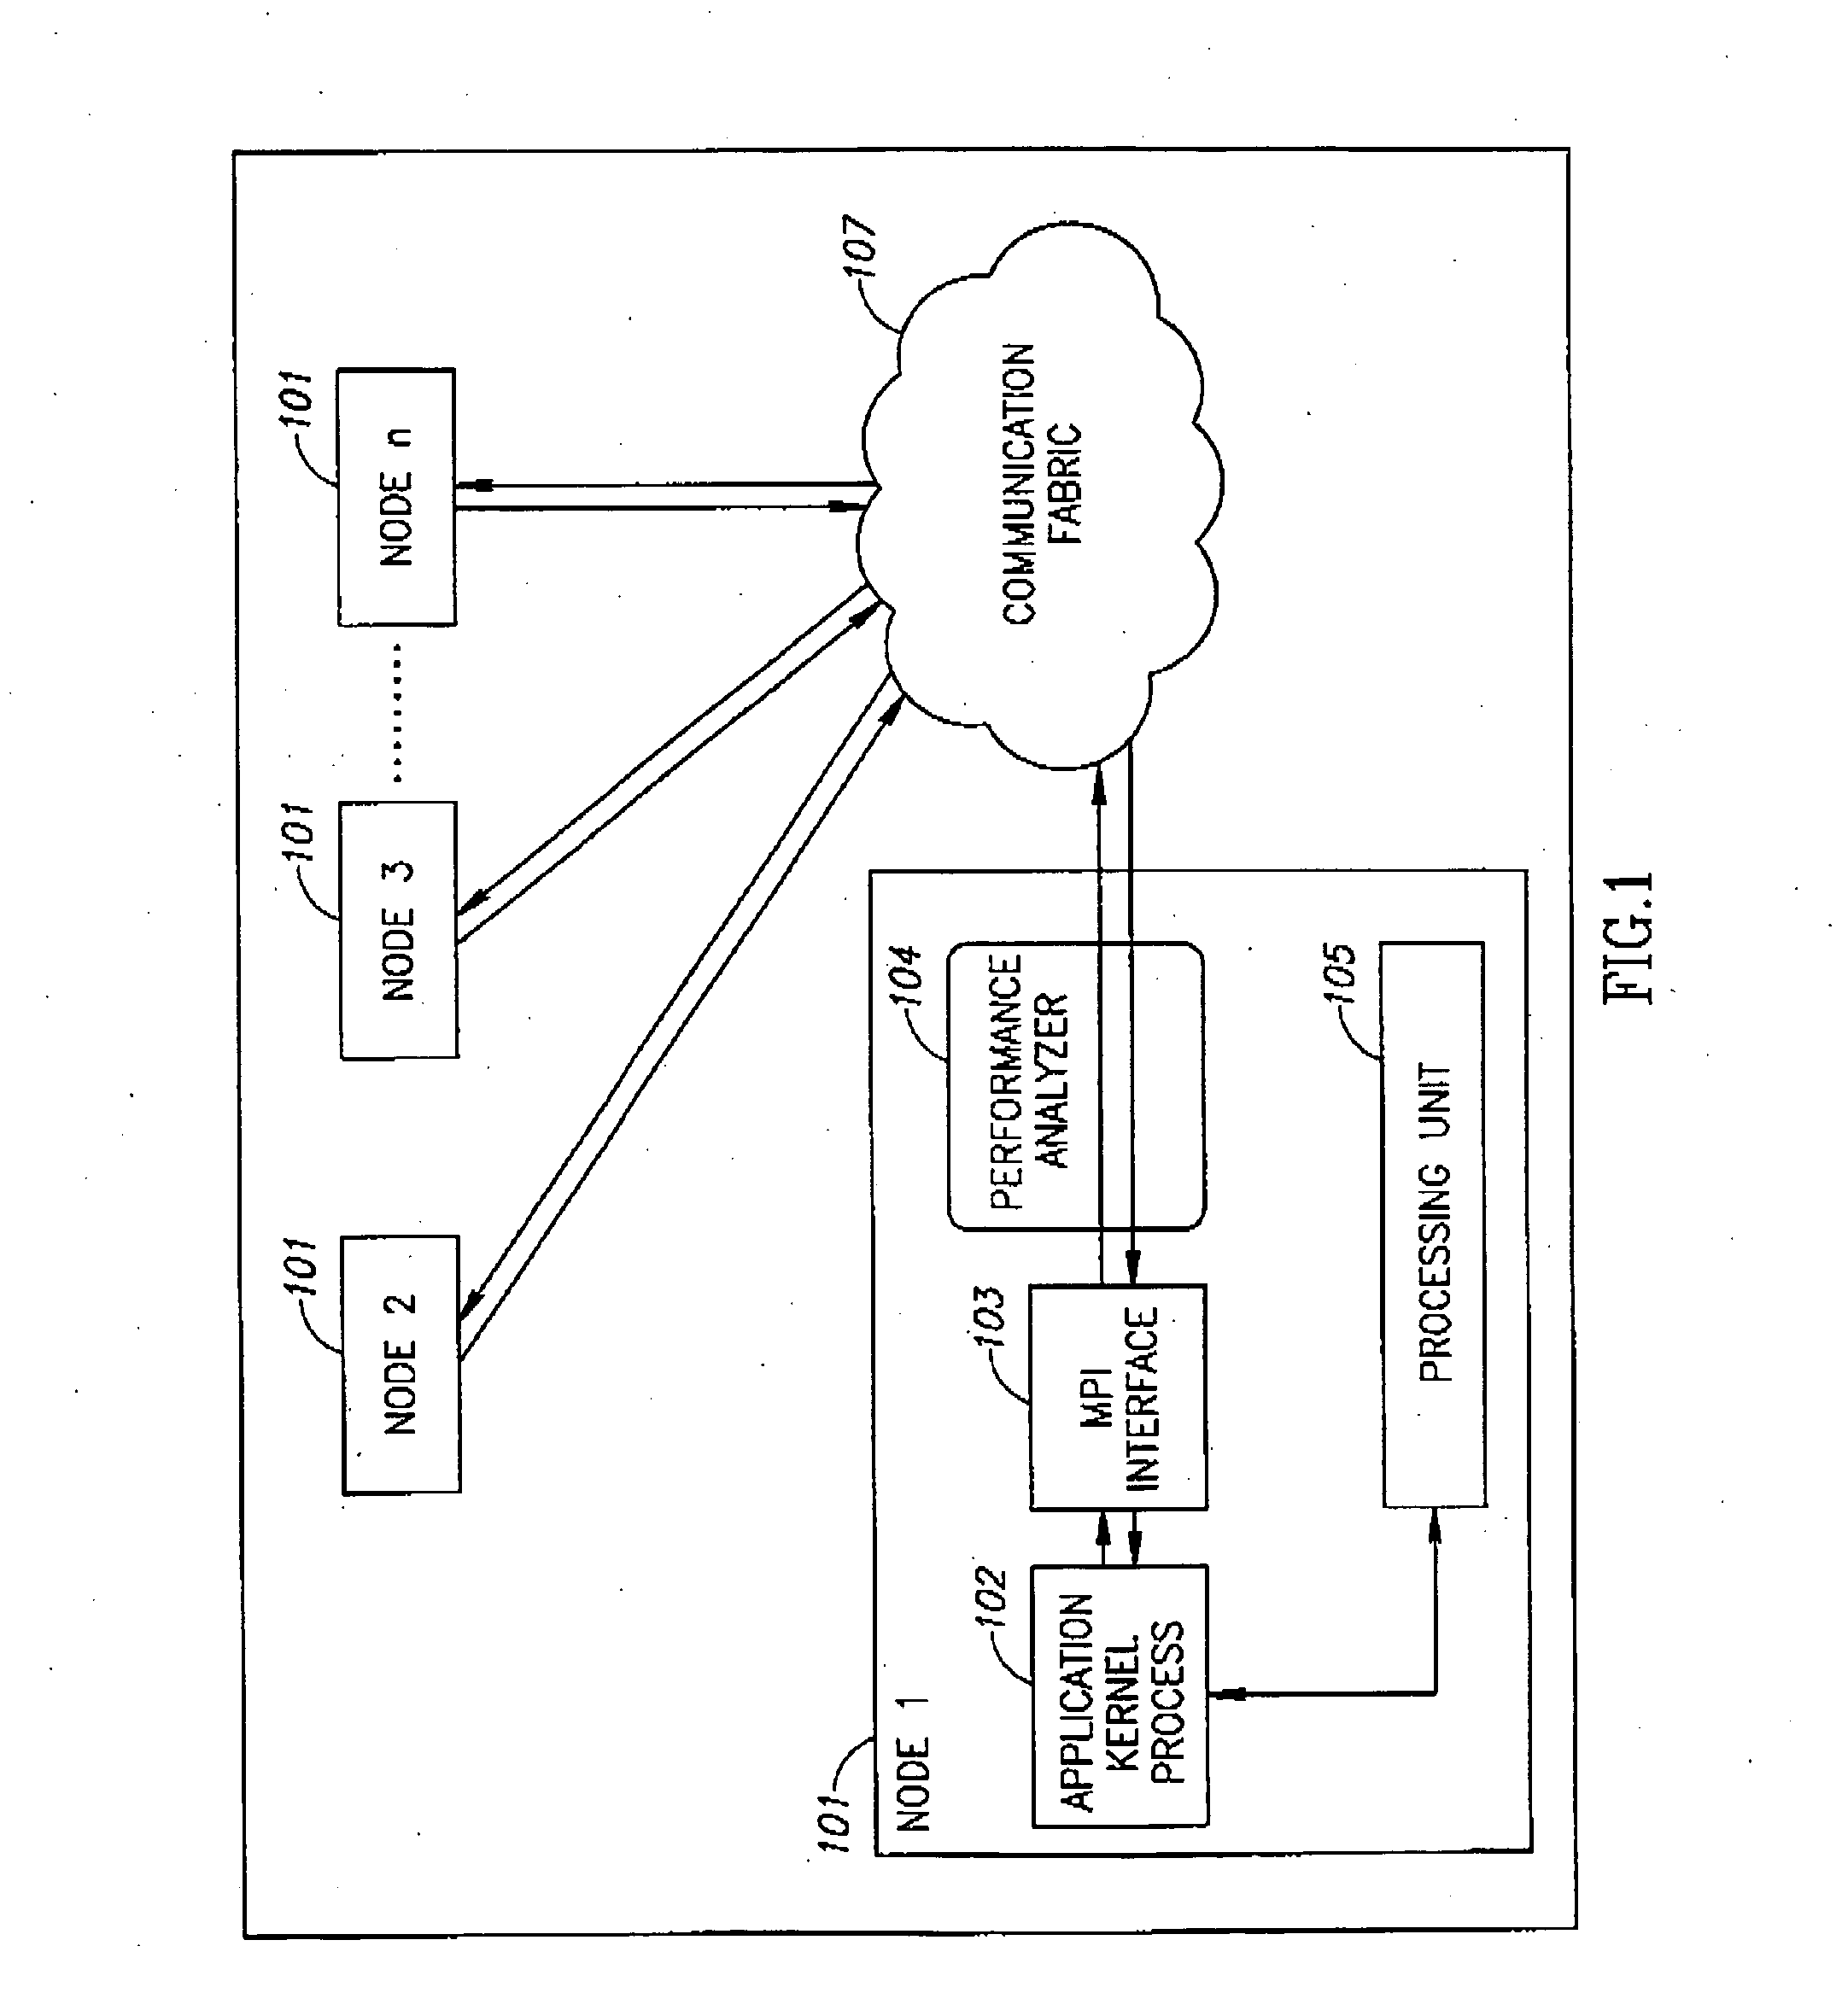 Automatic tuning of communication protocol performance